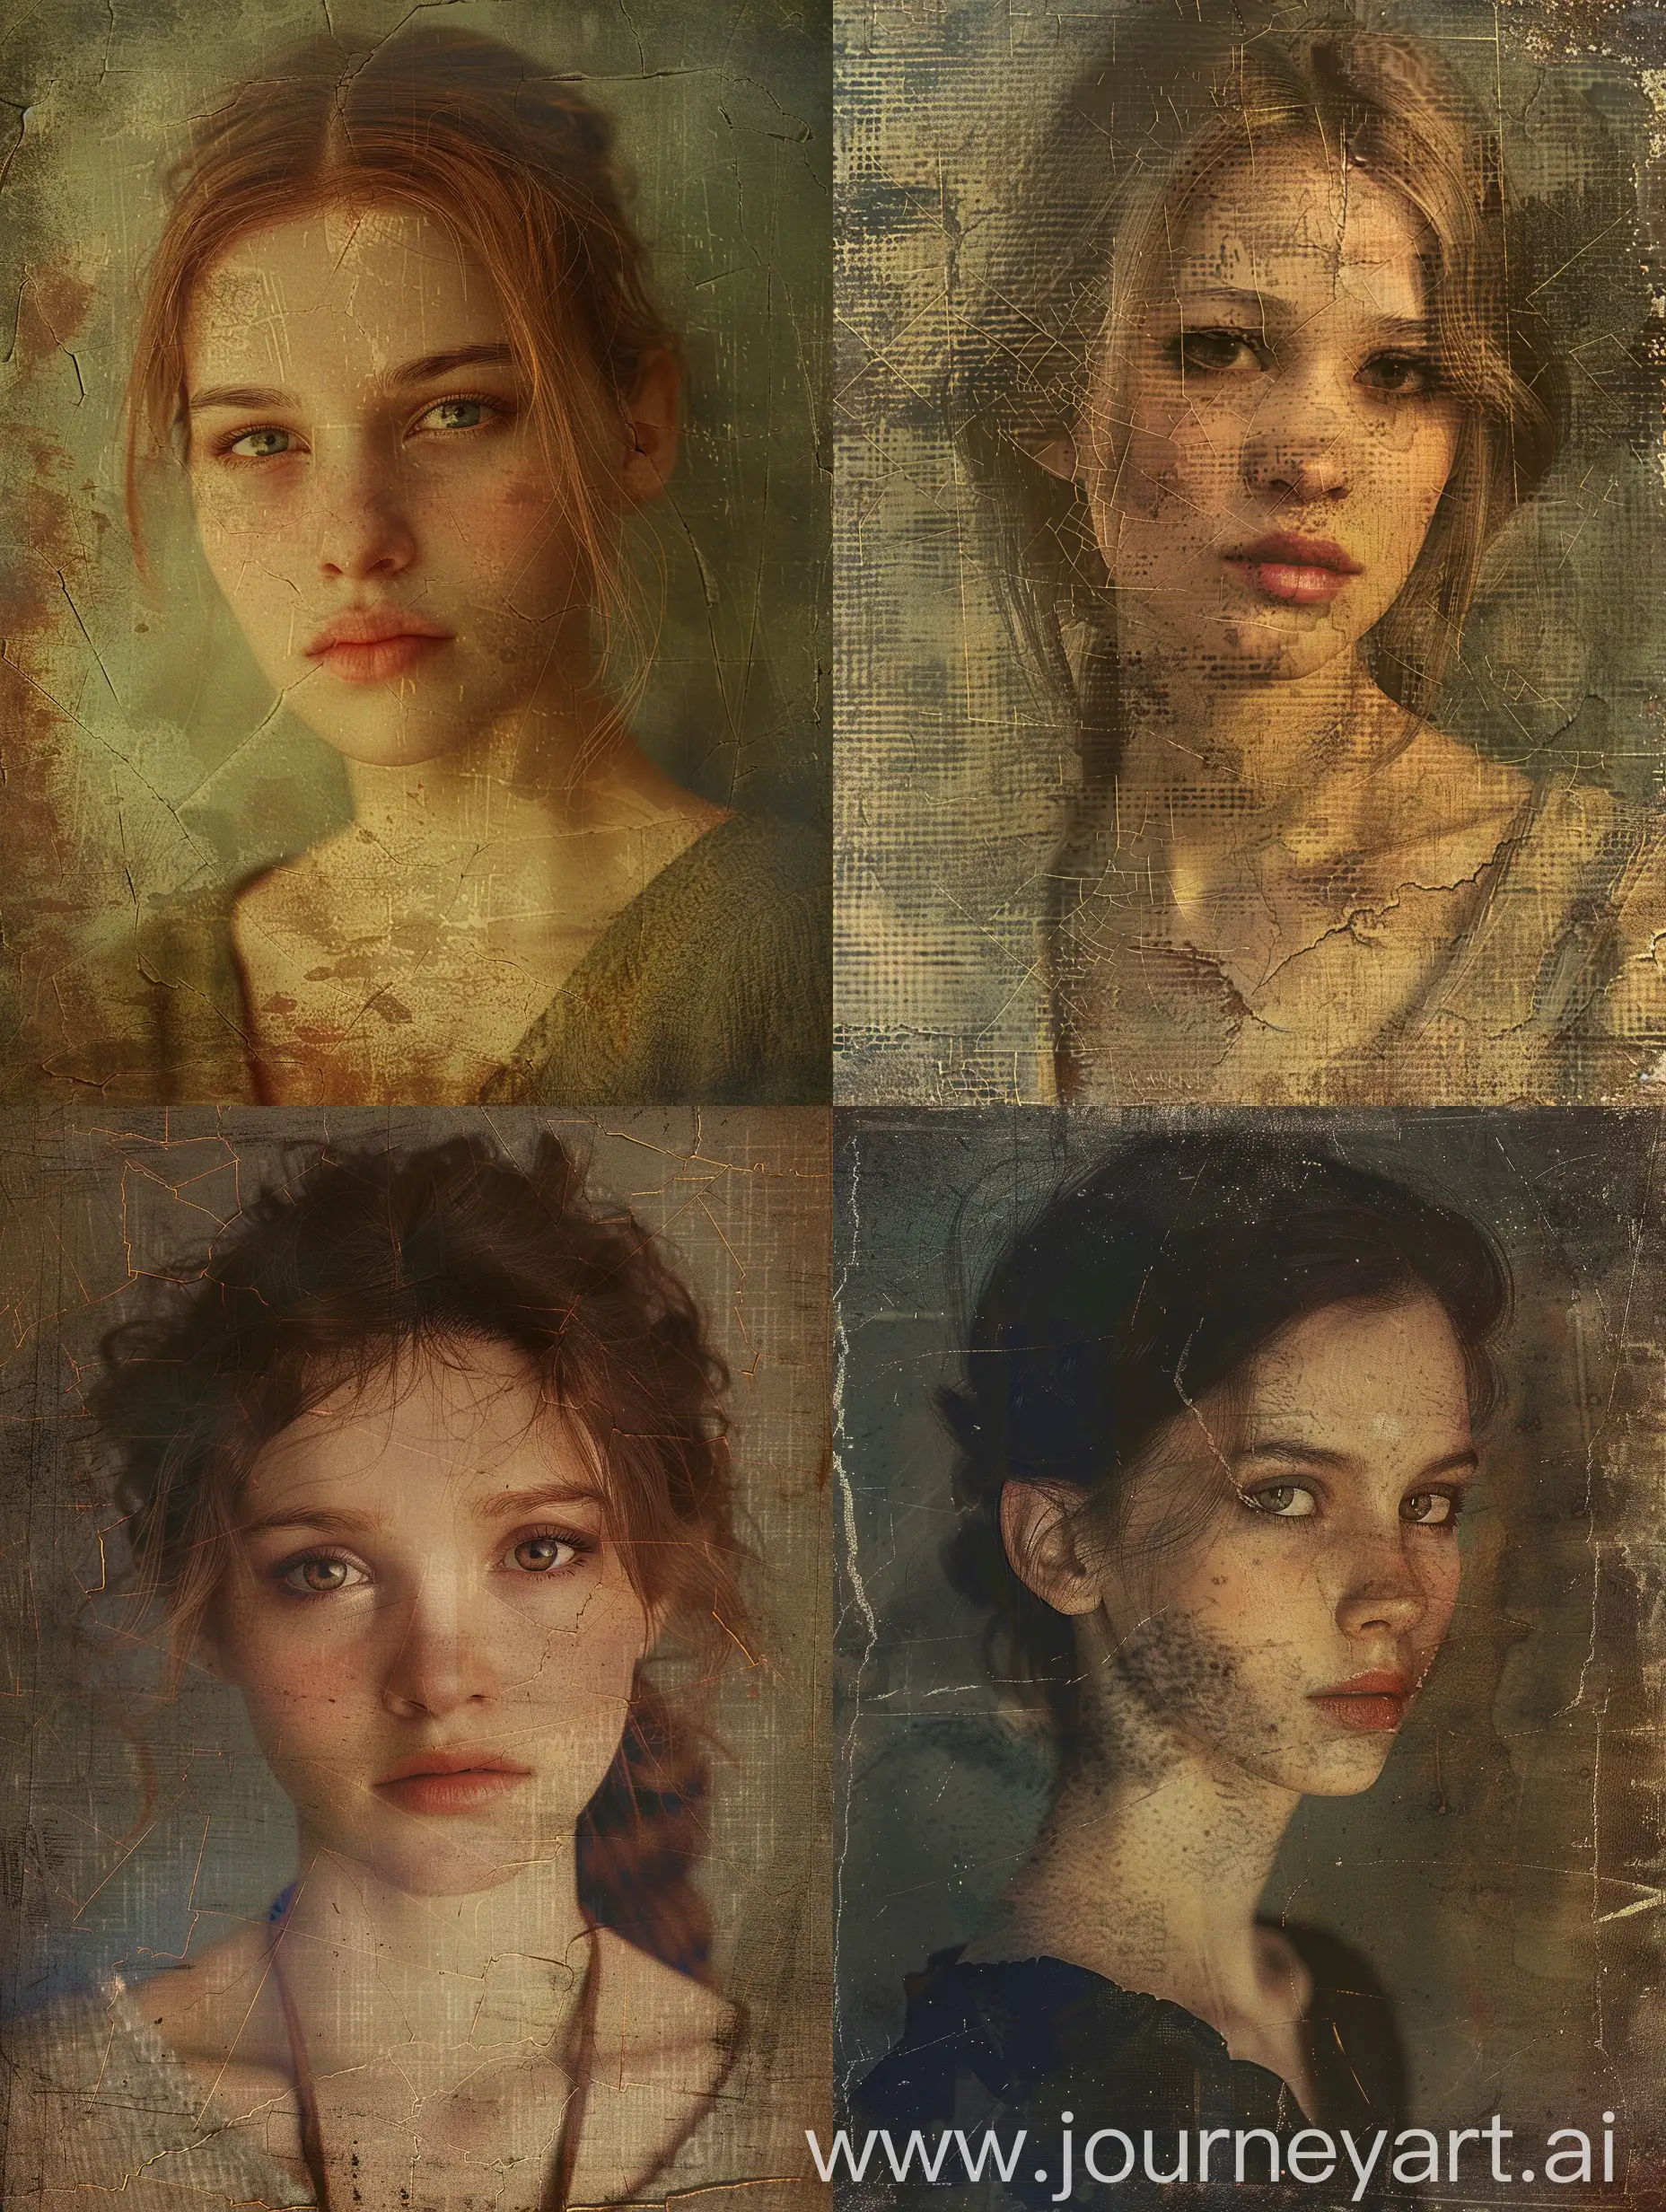 Aged-Portrait-of-a-Young-Woman-in-Faded-Oil-Painting-Style